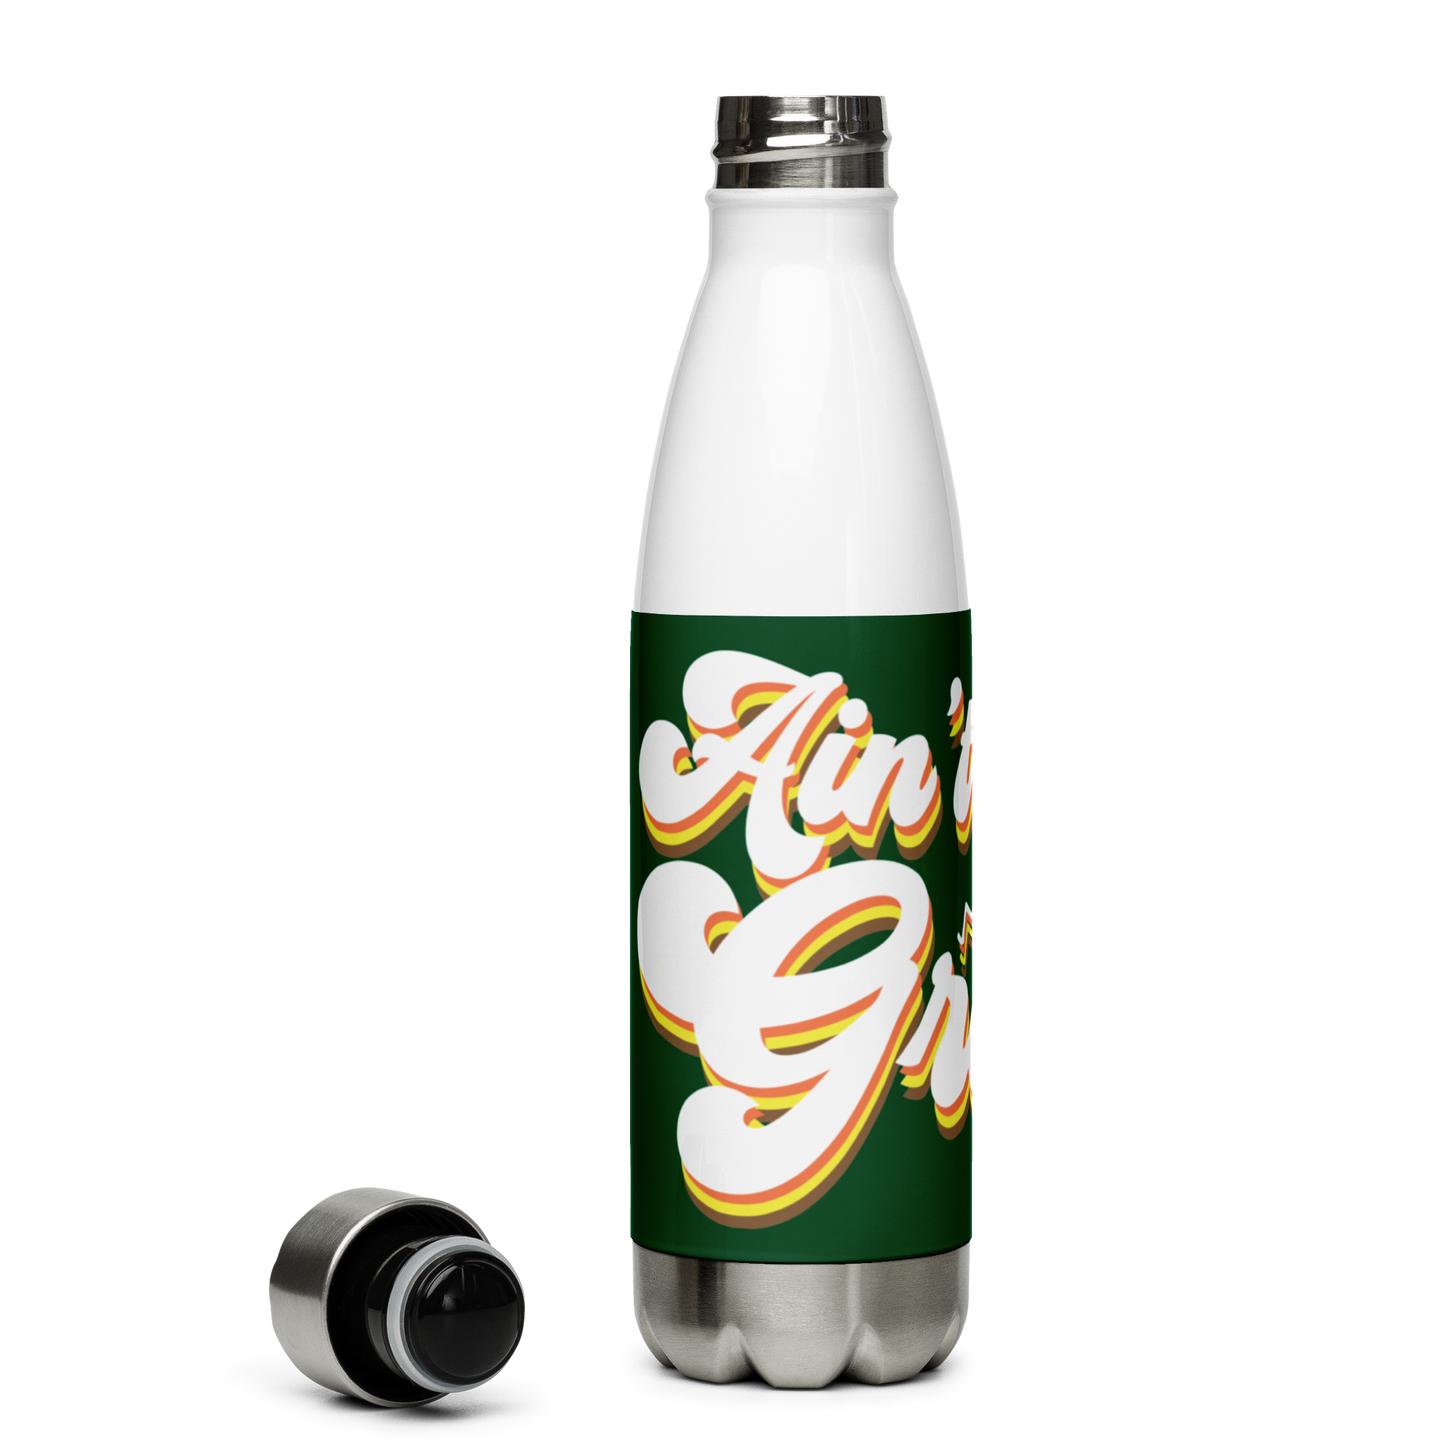 Ain't Life Grand Stainless Steel Water Bottle 17oz | Printed Graphics